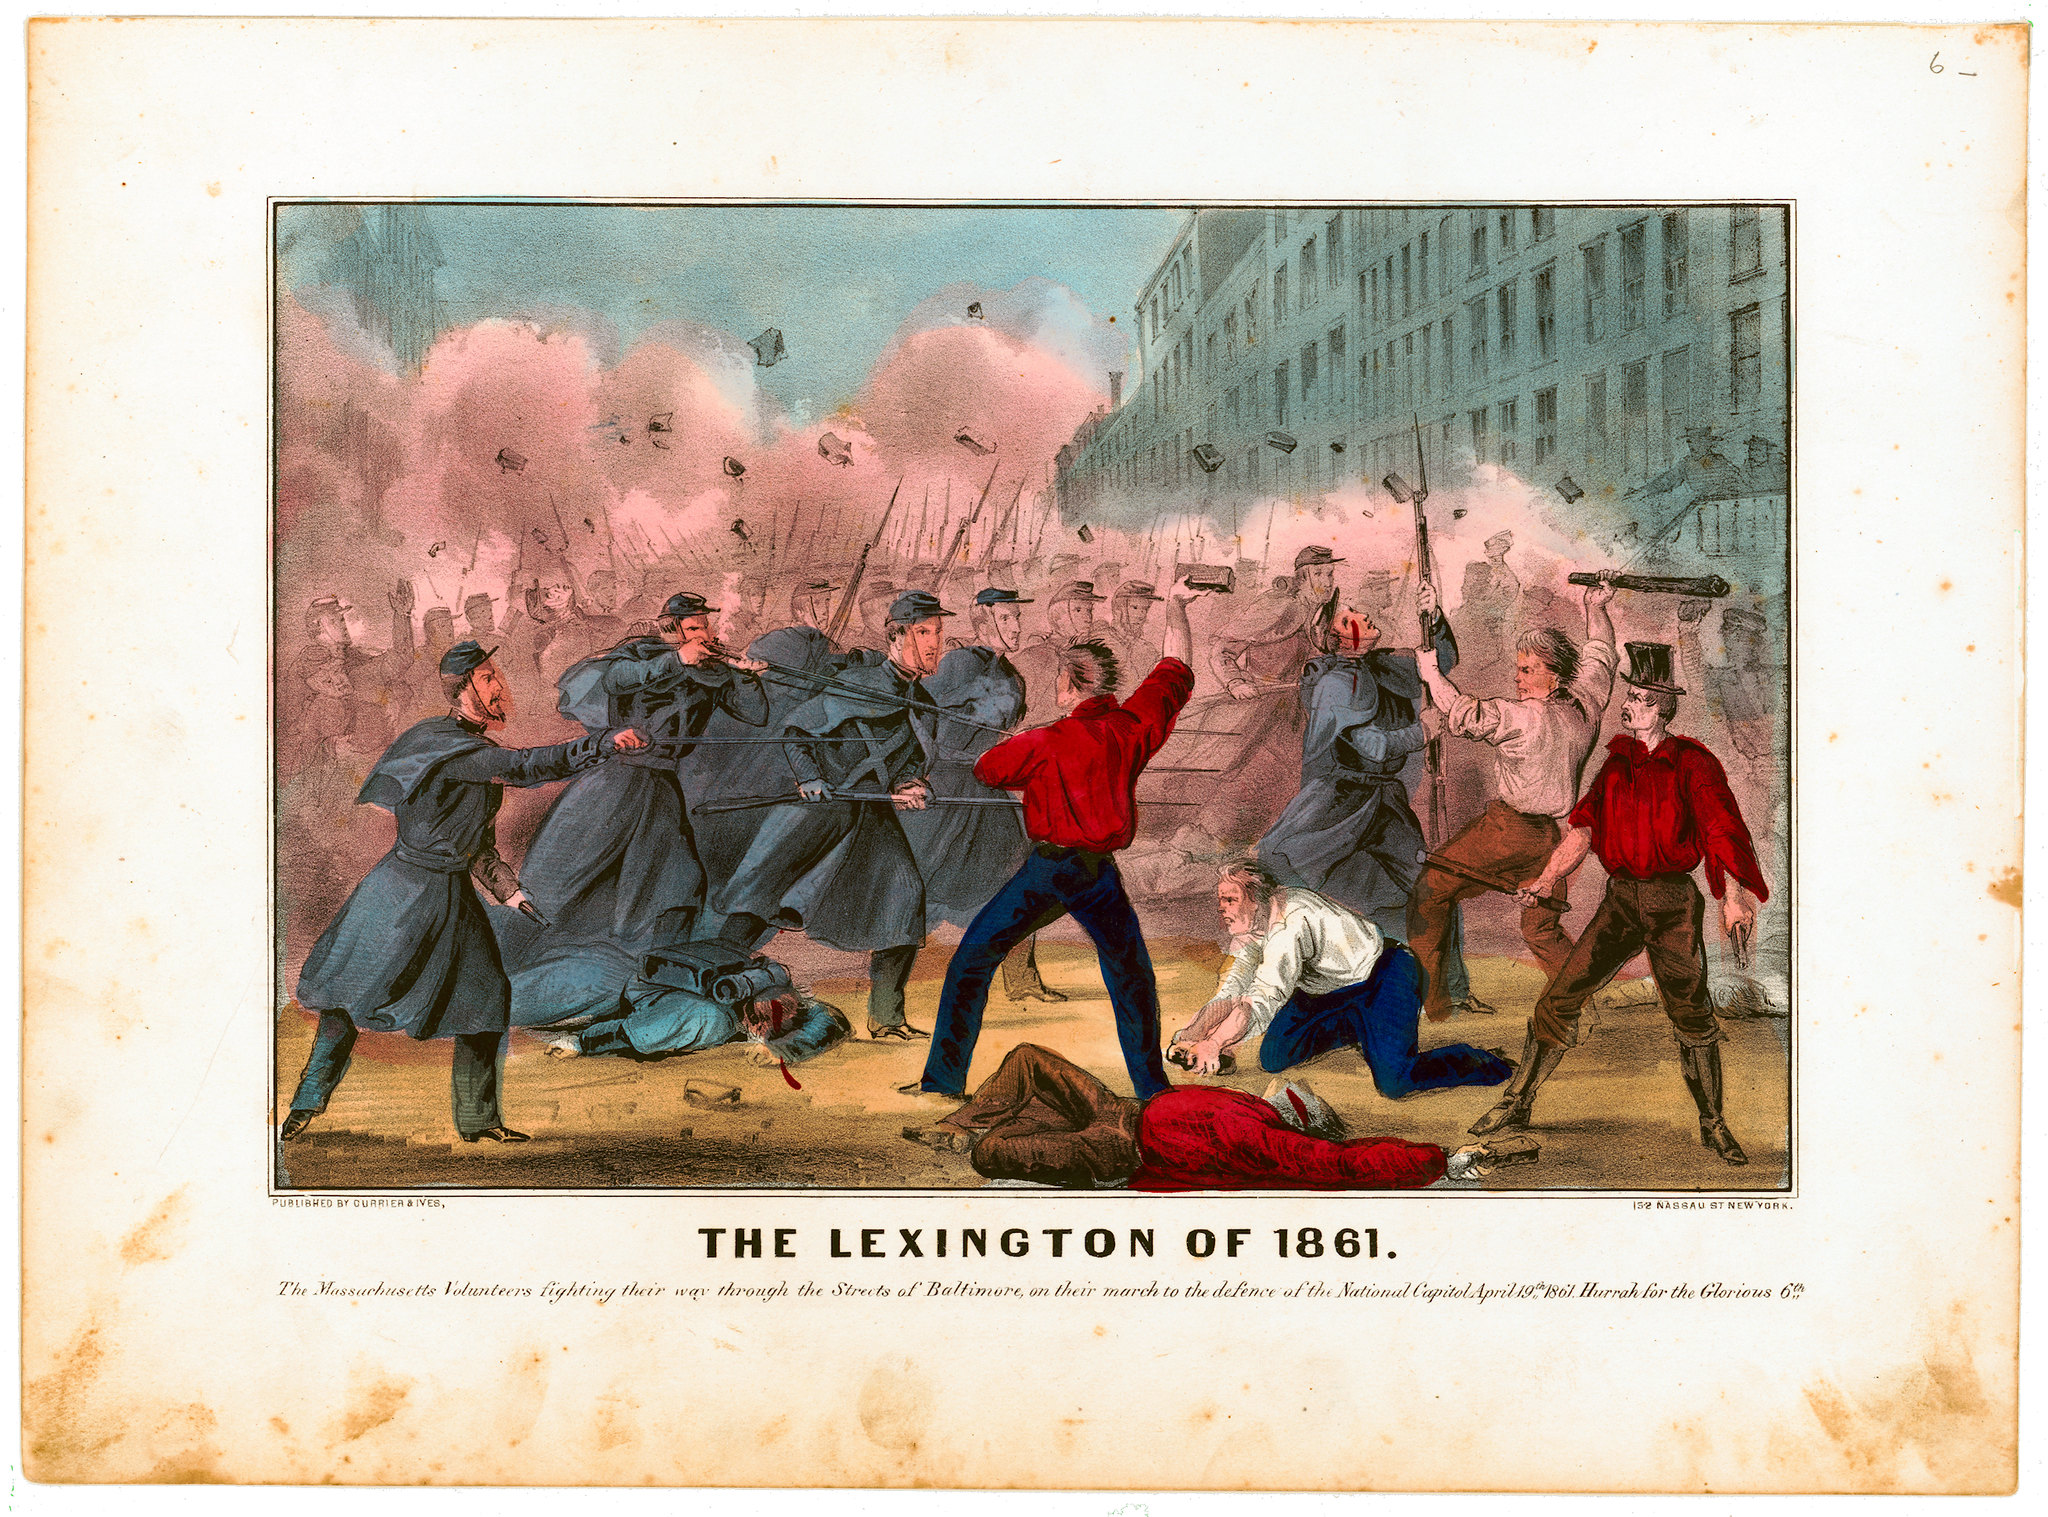 The Massachusetts Volunteers fighting their way through the Streets of Baltimore, on their march to the defence of the National Capitol April 19th, 1861. Hurrah for the Glorious 6th.